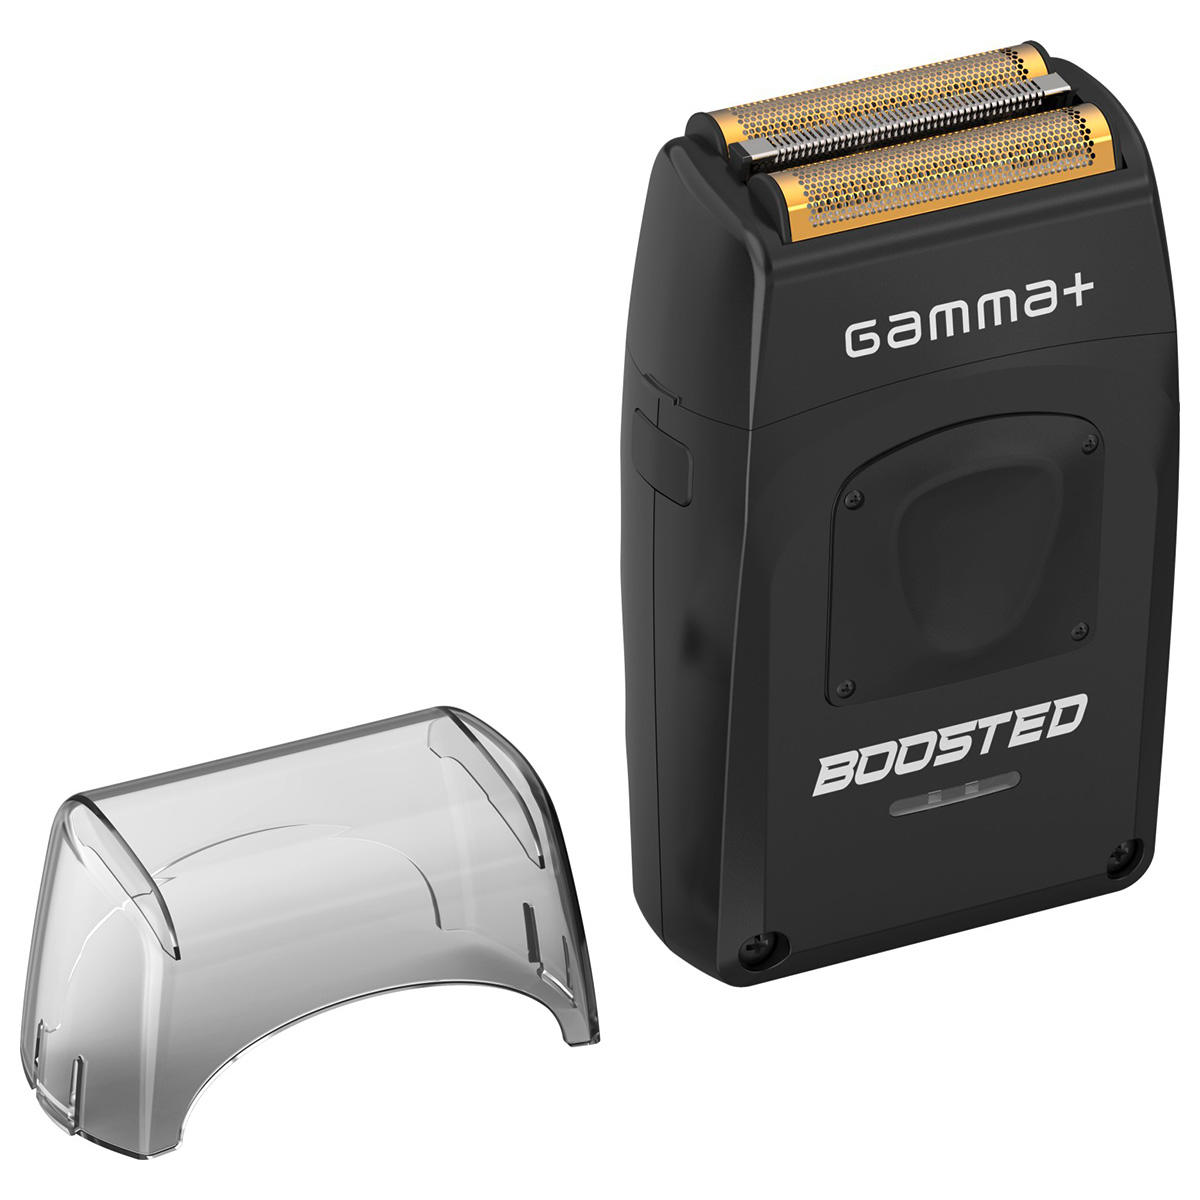 Gamma+ Boosted Shaver  - 2